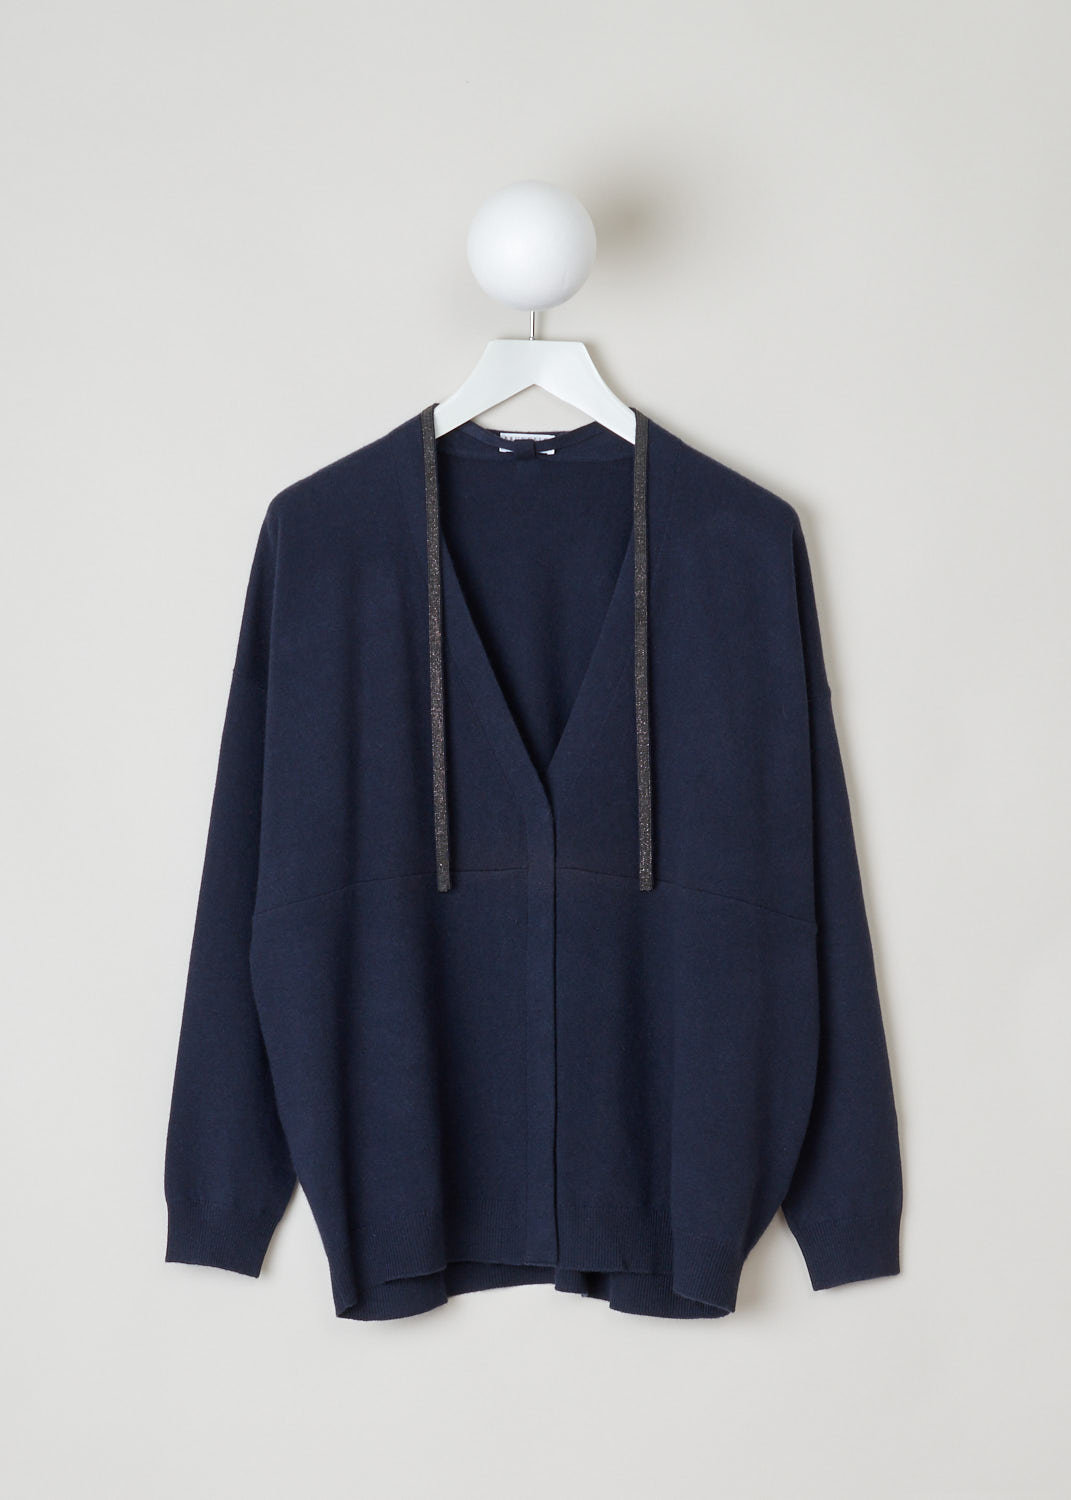 Brunello Cucinelli, Oversized navy cardigan, M16120506_CX033, blue, front, Navy colored cardigan featuring an oversized fit with long sleeves. Furthermore this cardigan comes with self-tie features being their signature line on beads. 